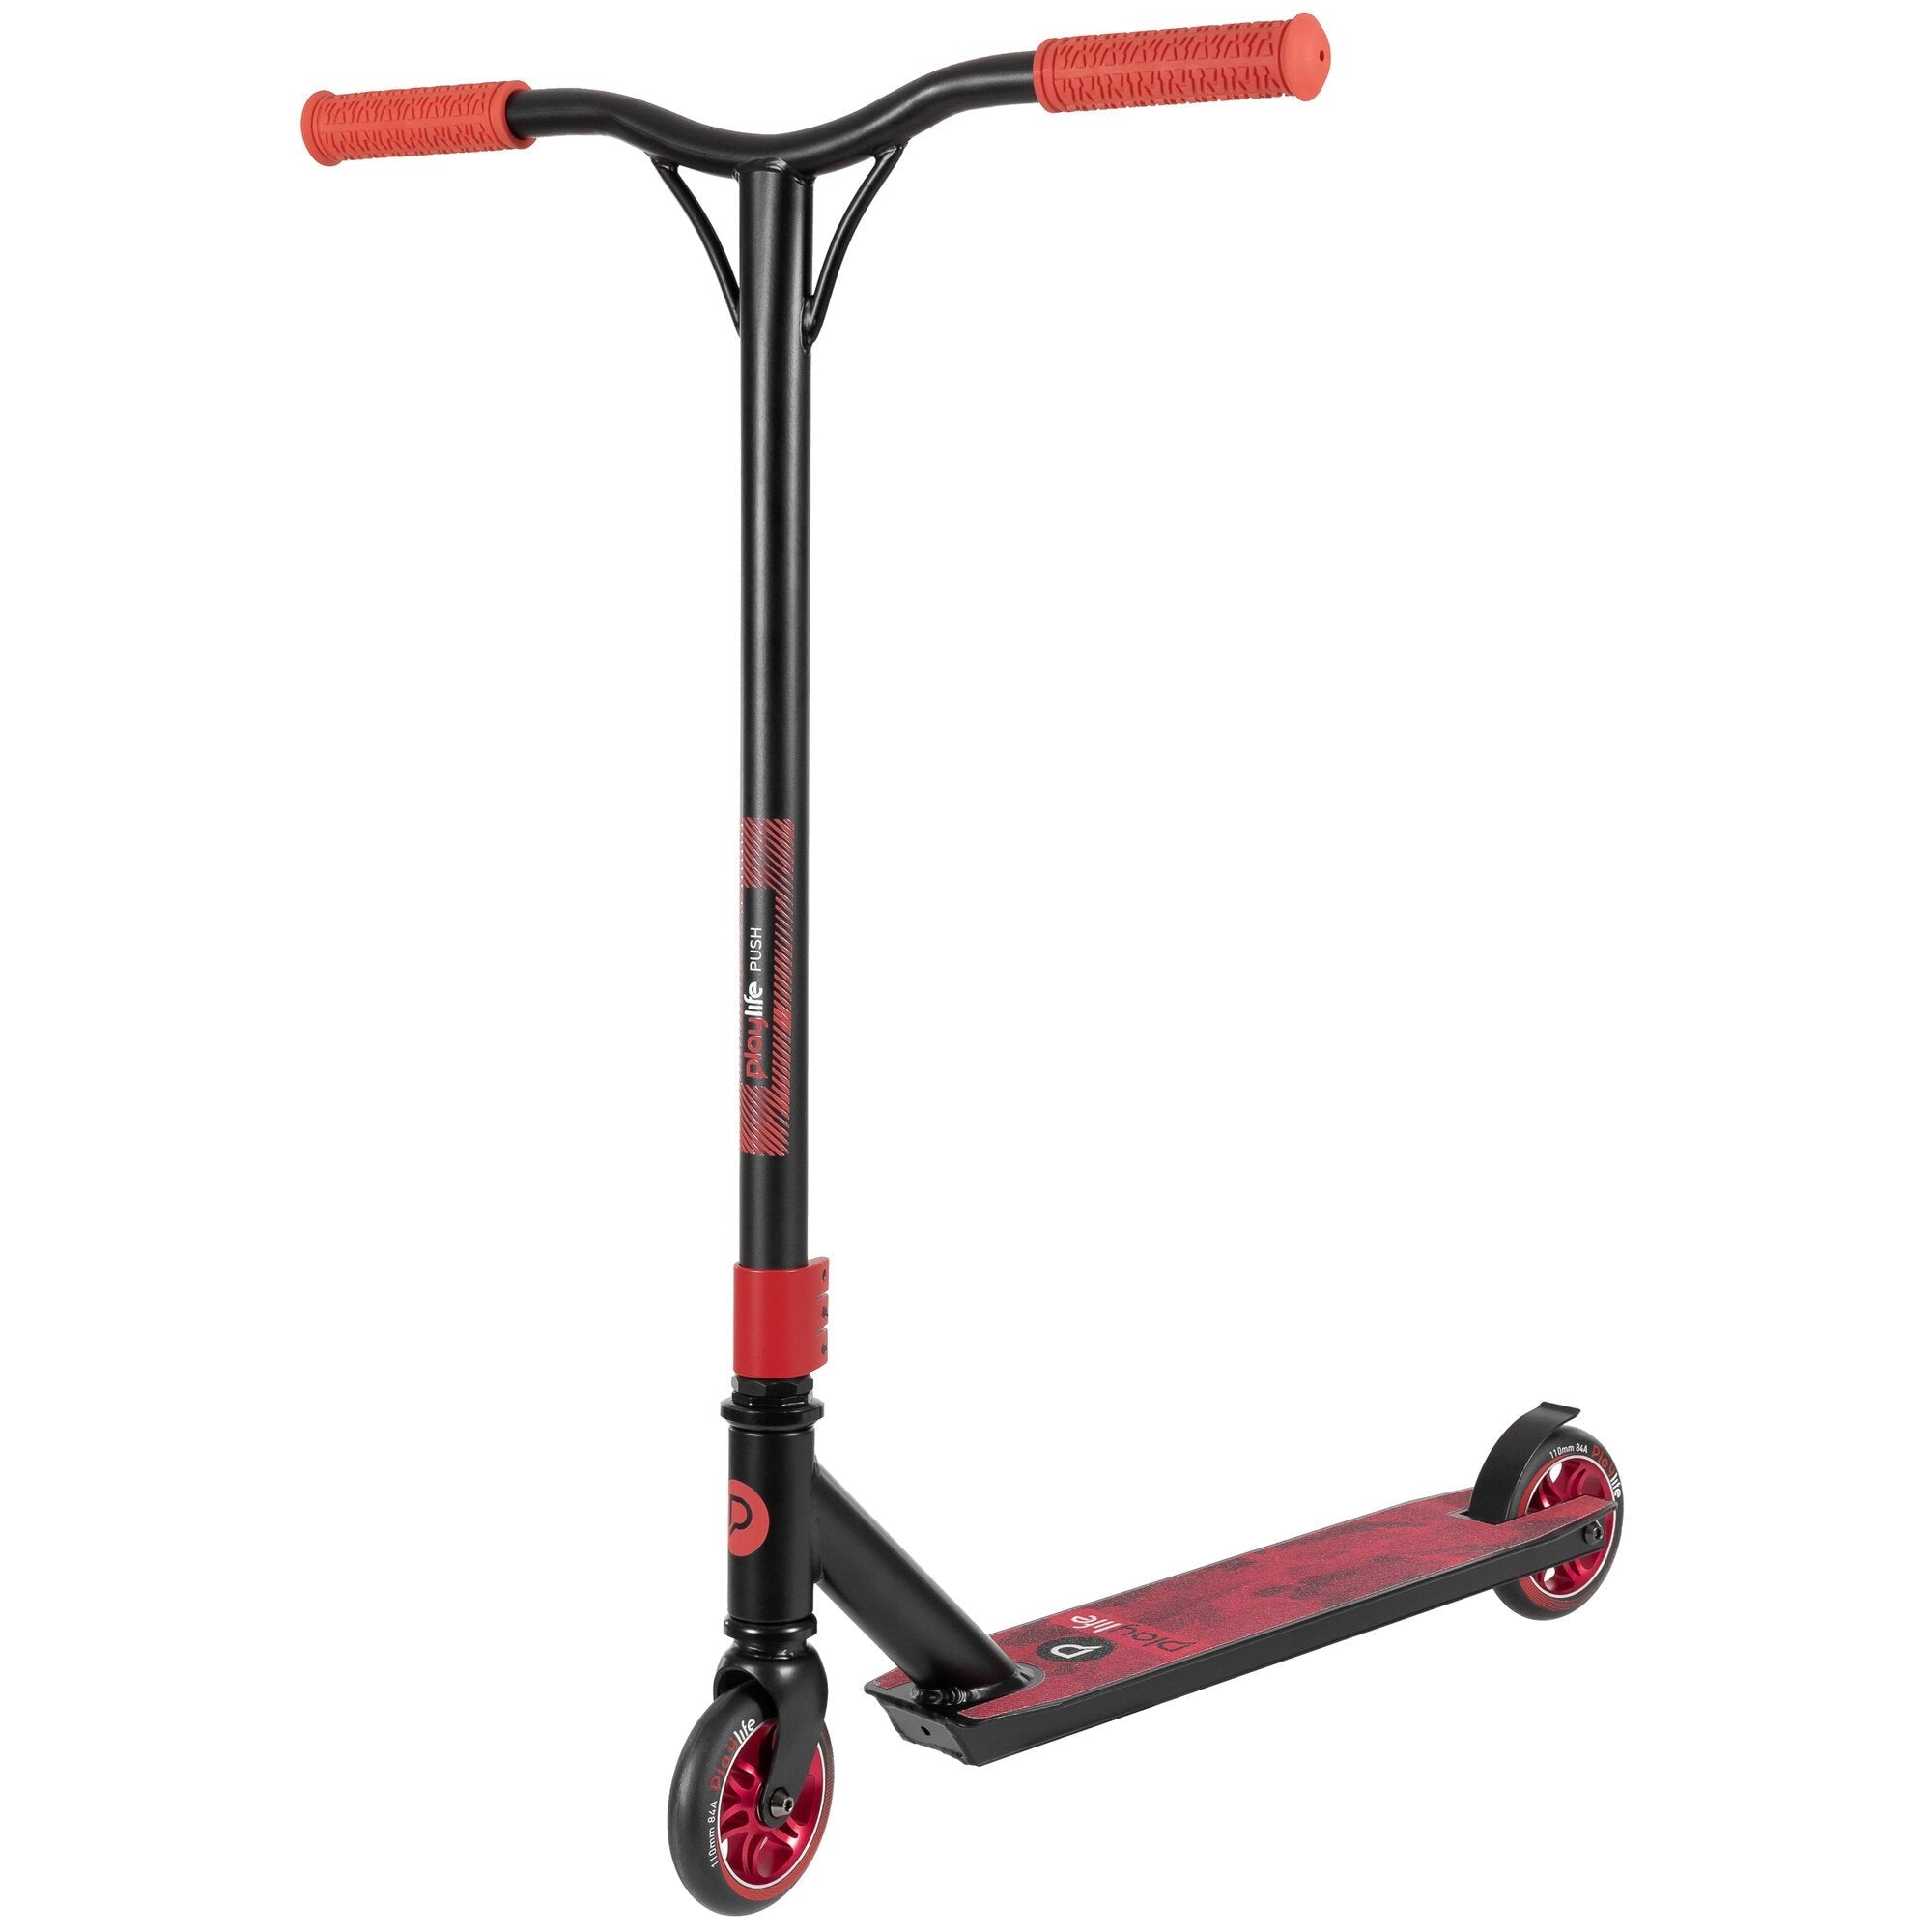 PLAYLIFE - Push Red Stunt Scooter